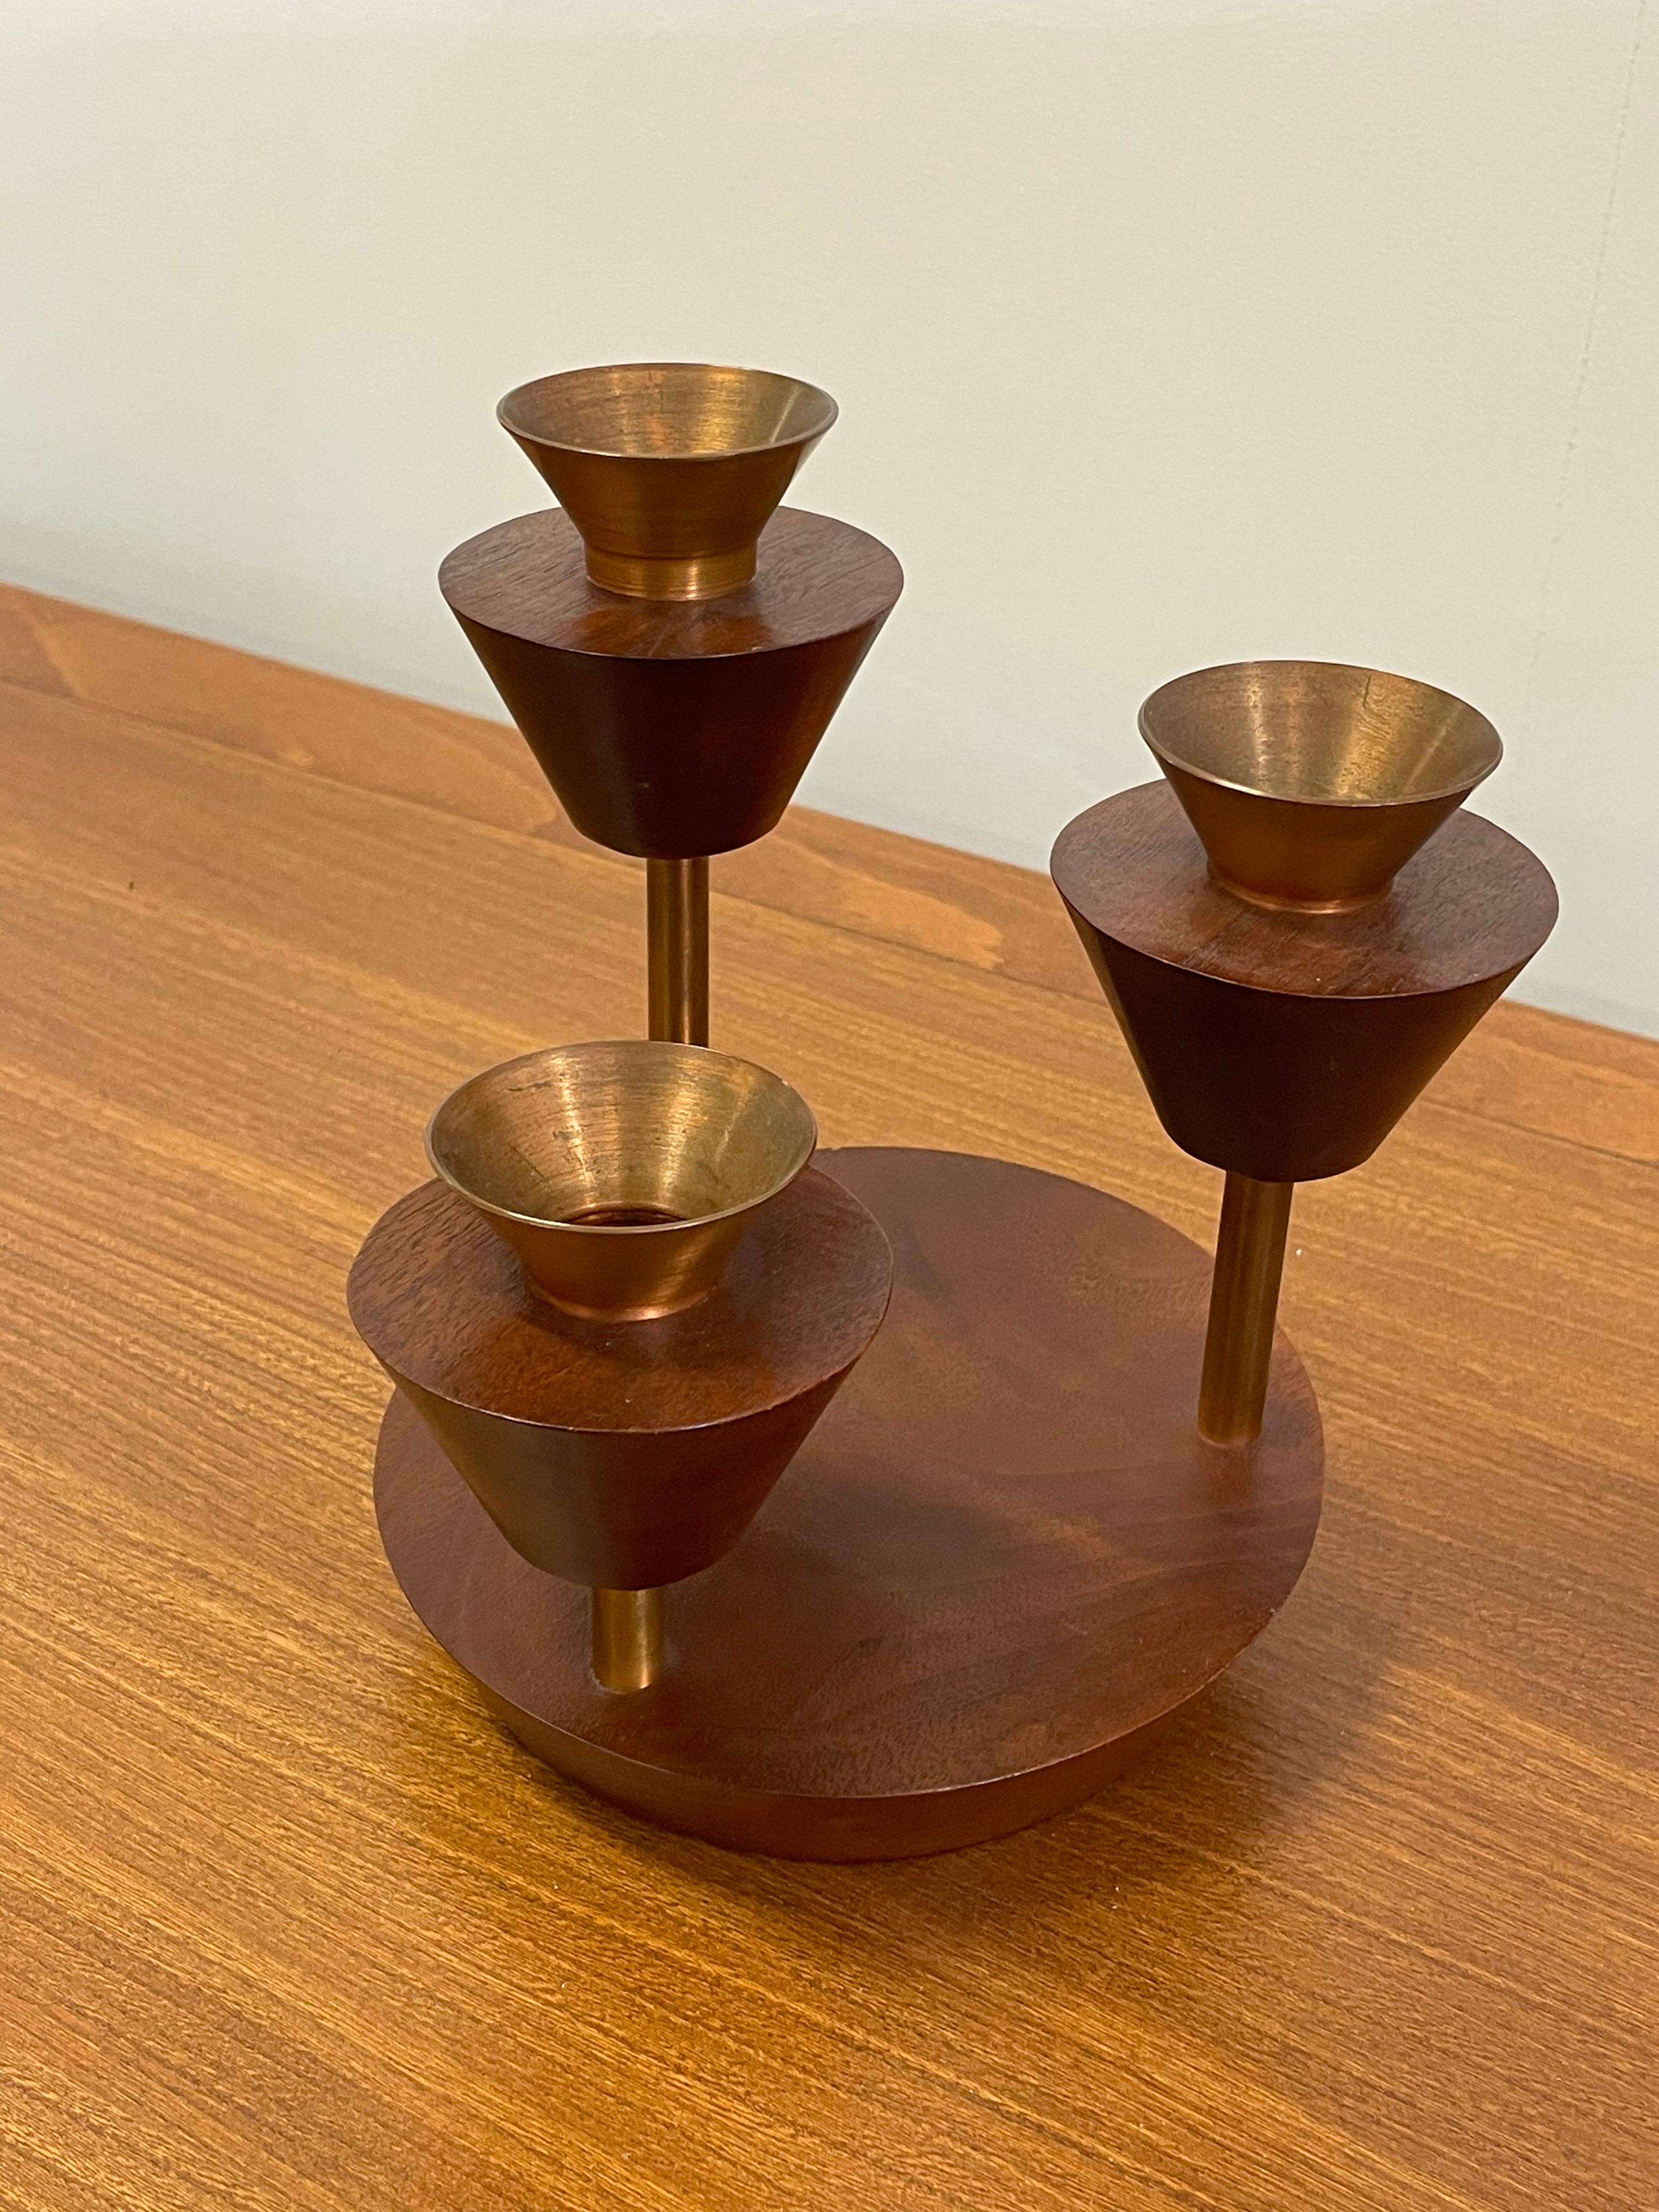 Unusual artisan made tiered candelabra in walnut. Very good condition, with light wear. Signed to underneath in what appears to read 